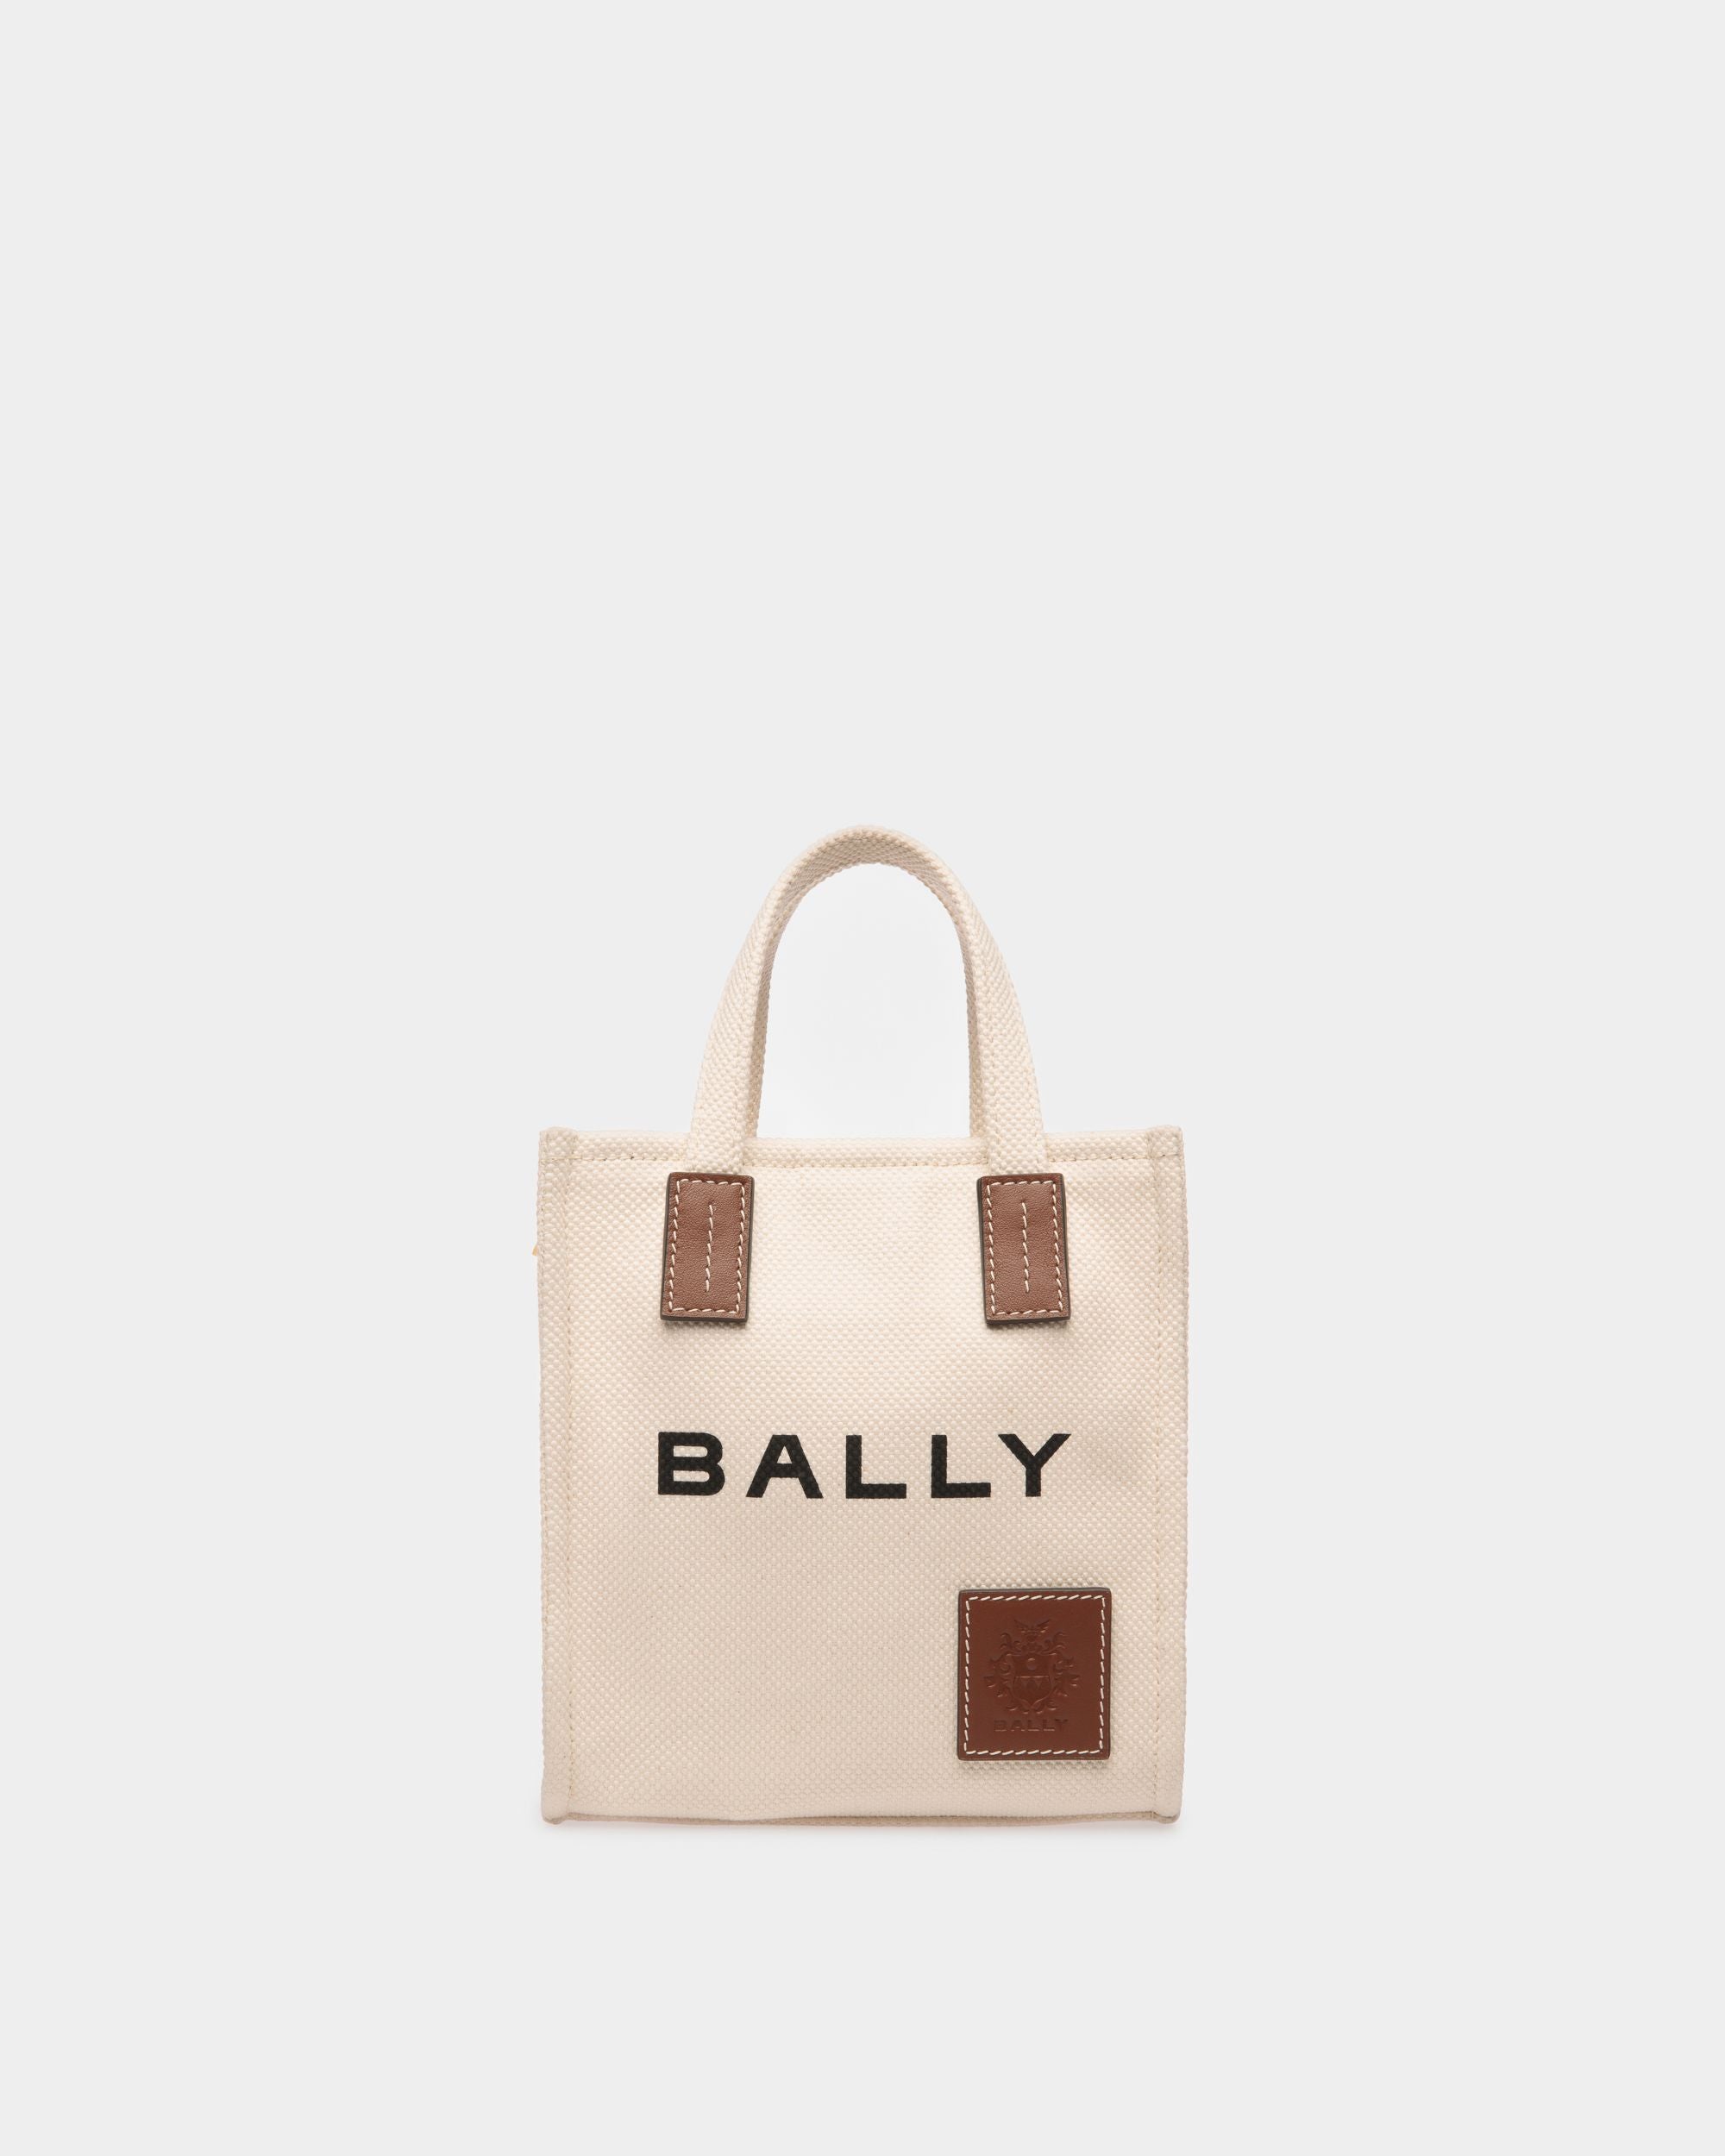 Akelei | Women's Mini Tote Bag in Neutral Canvas | Bally | Still Life Front